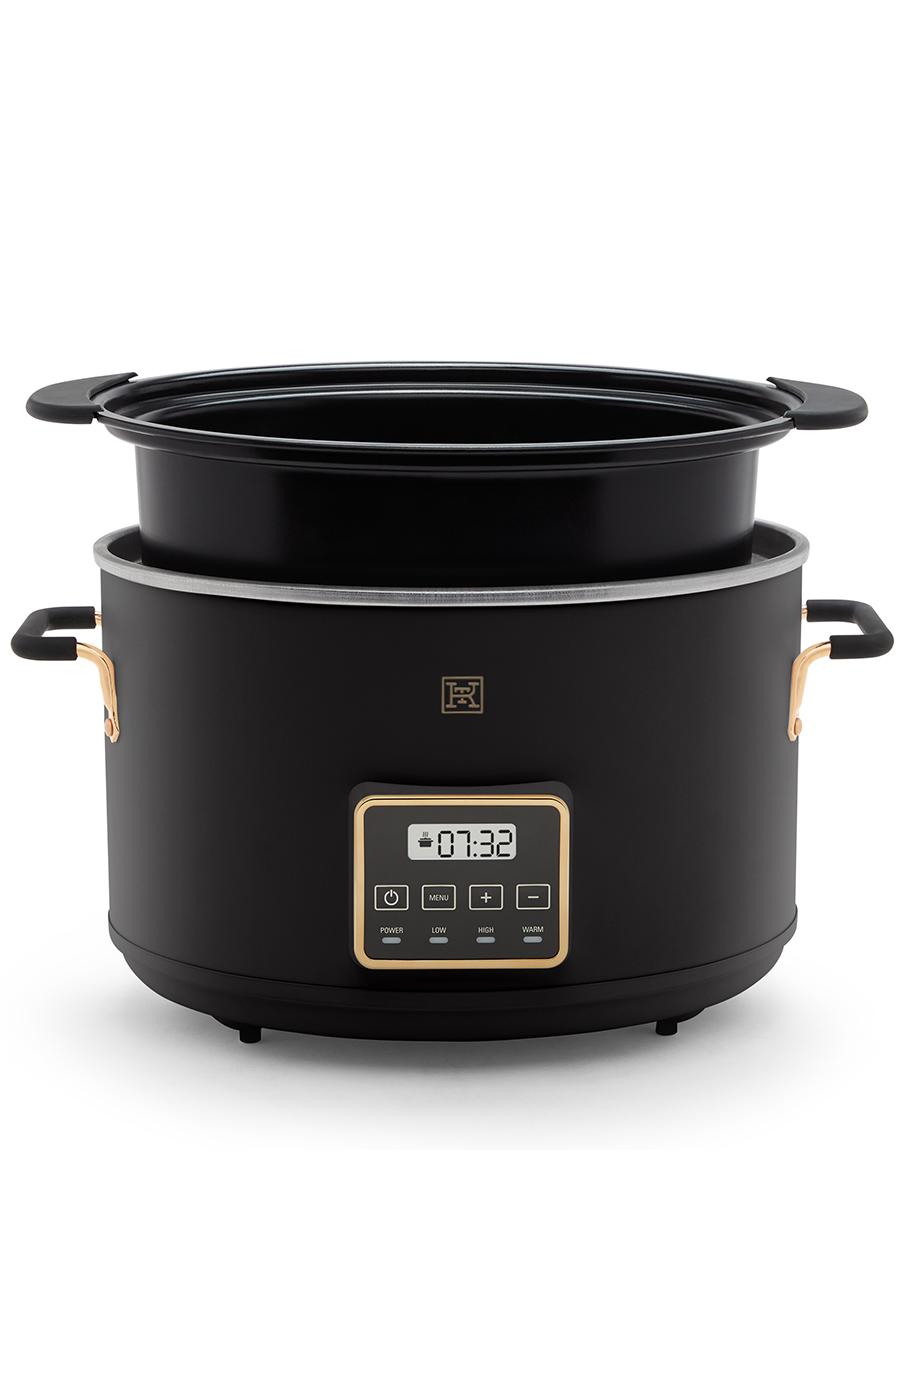 Crockpot Smart Pot With Locking Lid - Shop Cookers & Roasters at H-E-B